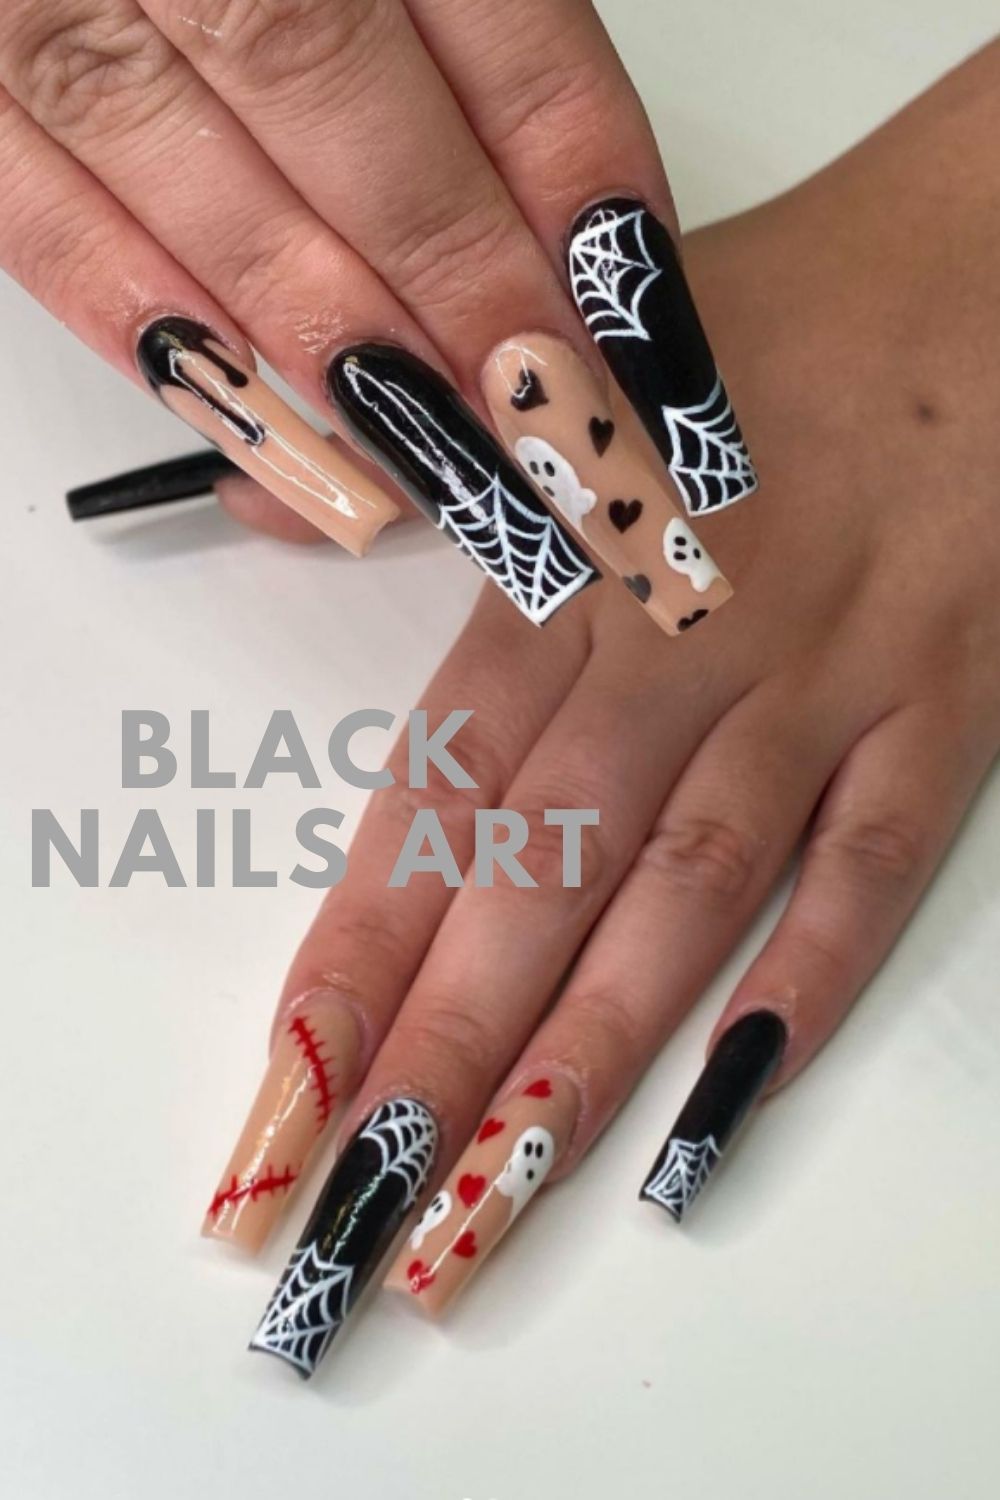 Long coffin nails for Halloween nails